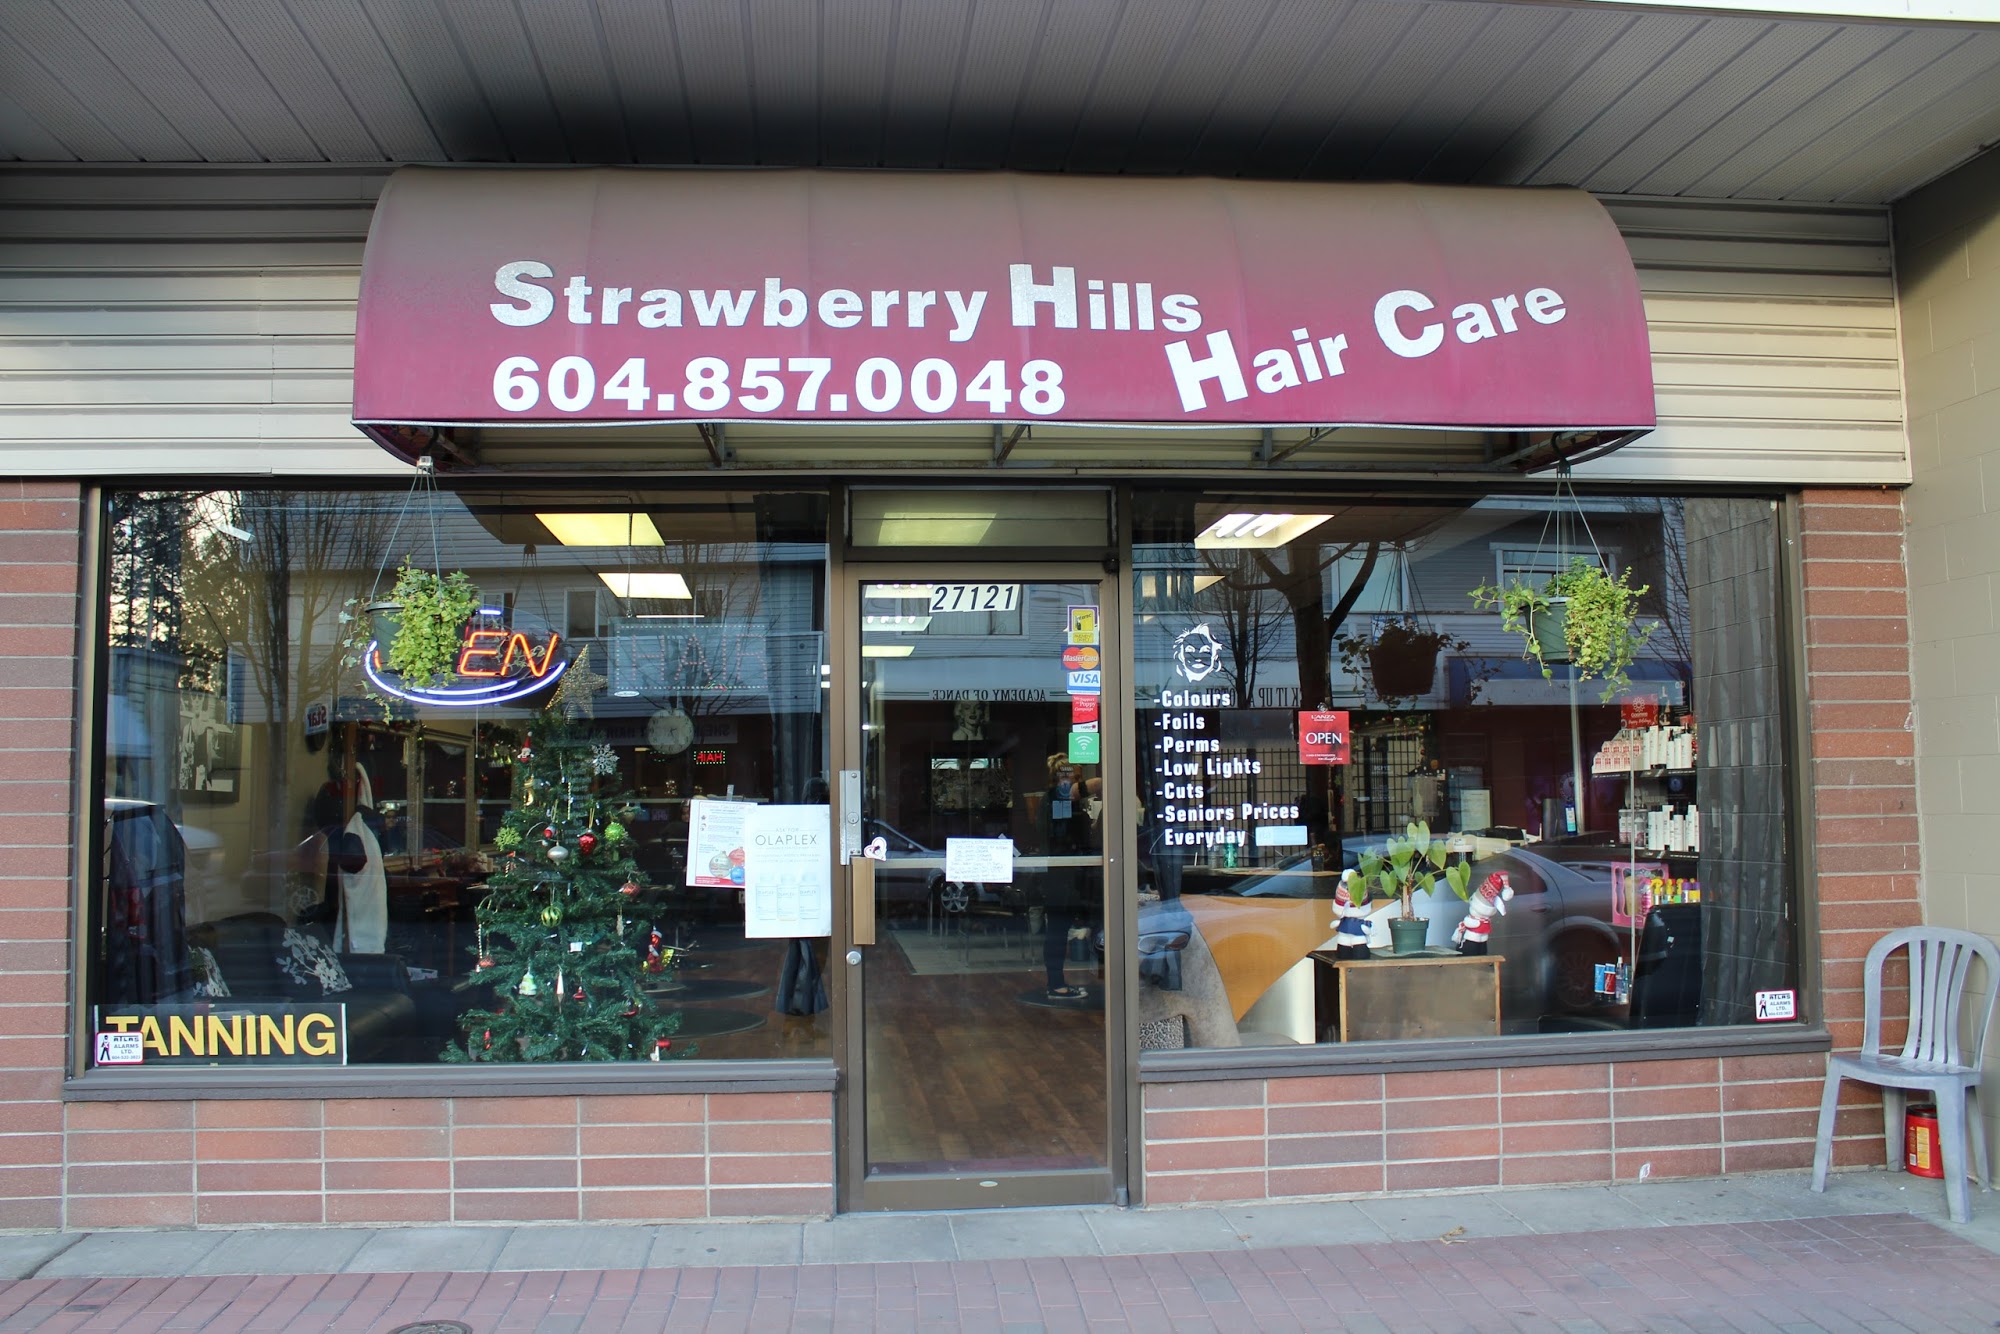 Strawberry Hills Hair Care